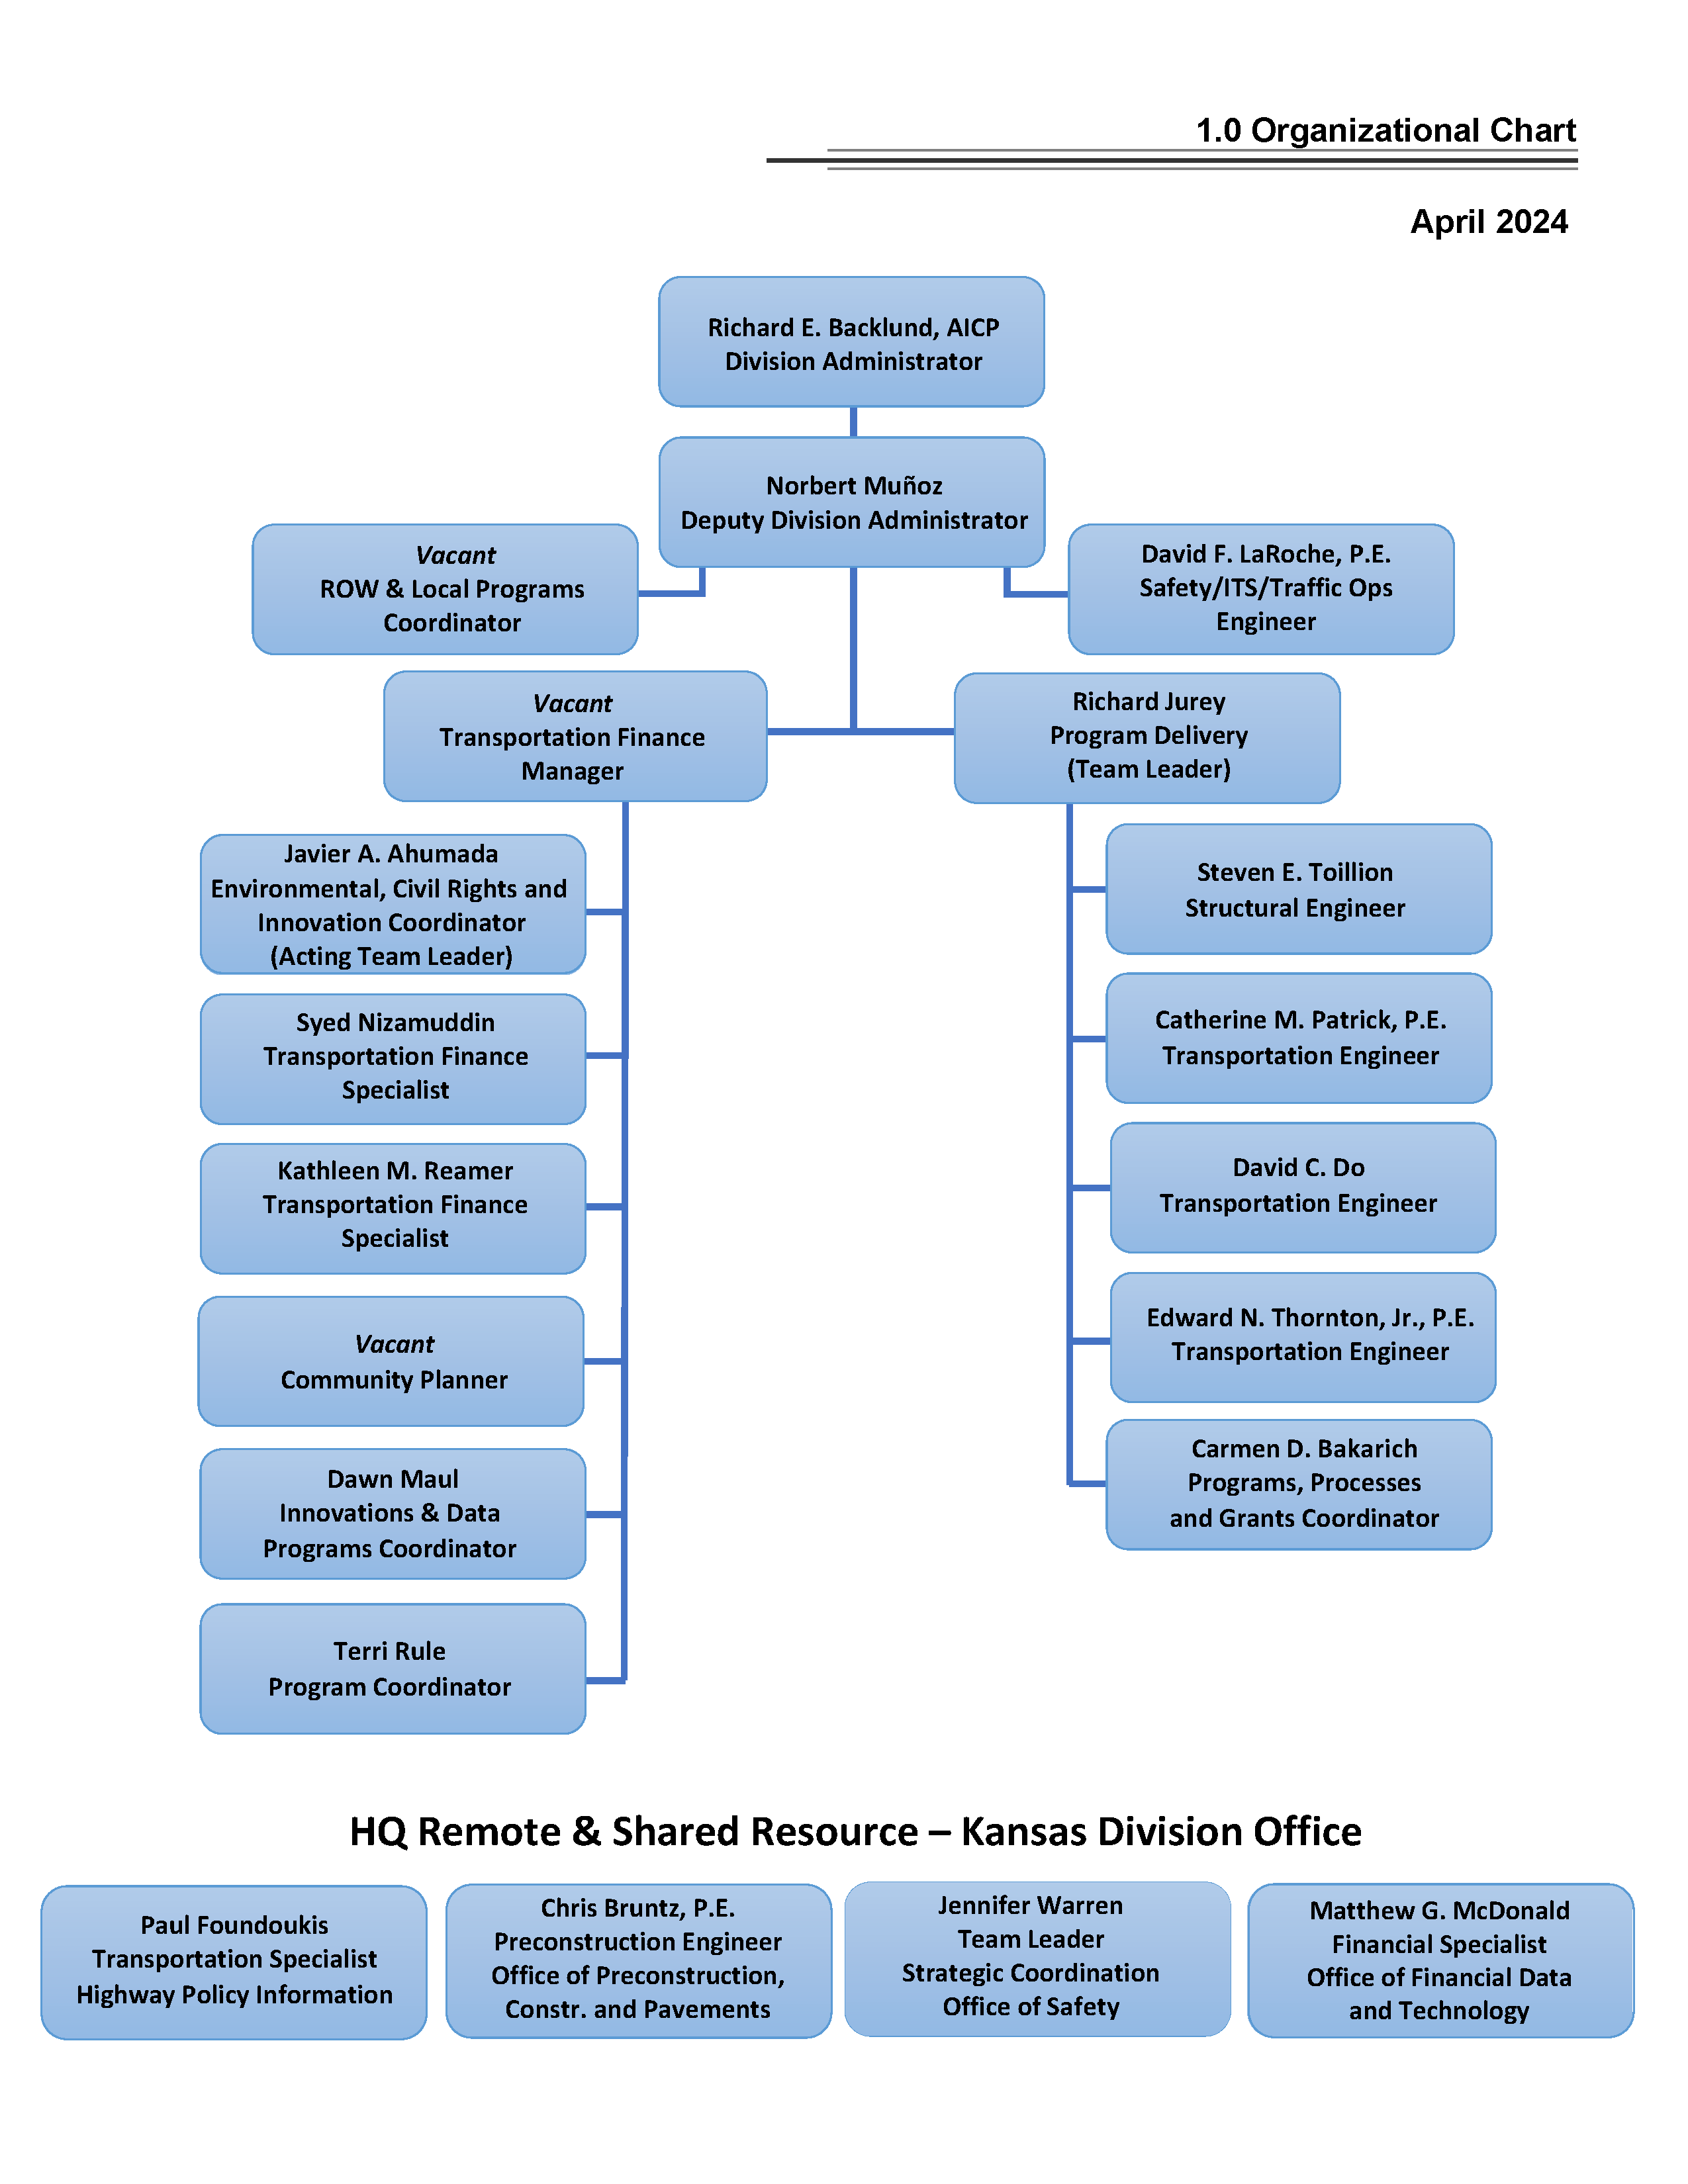 Kansas Division organization chart as described in the staff listing.